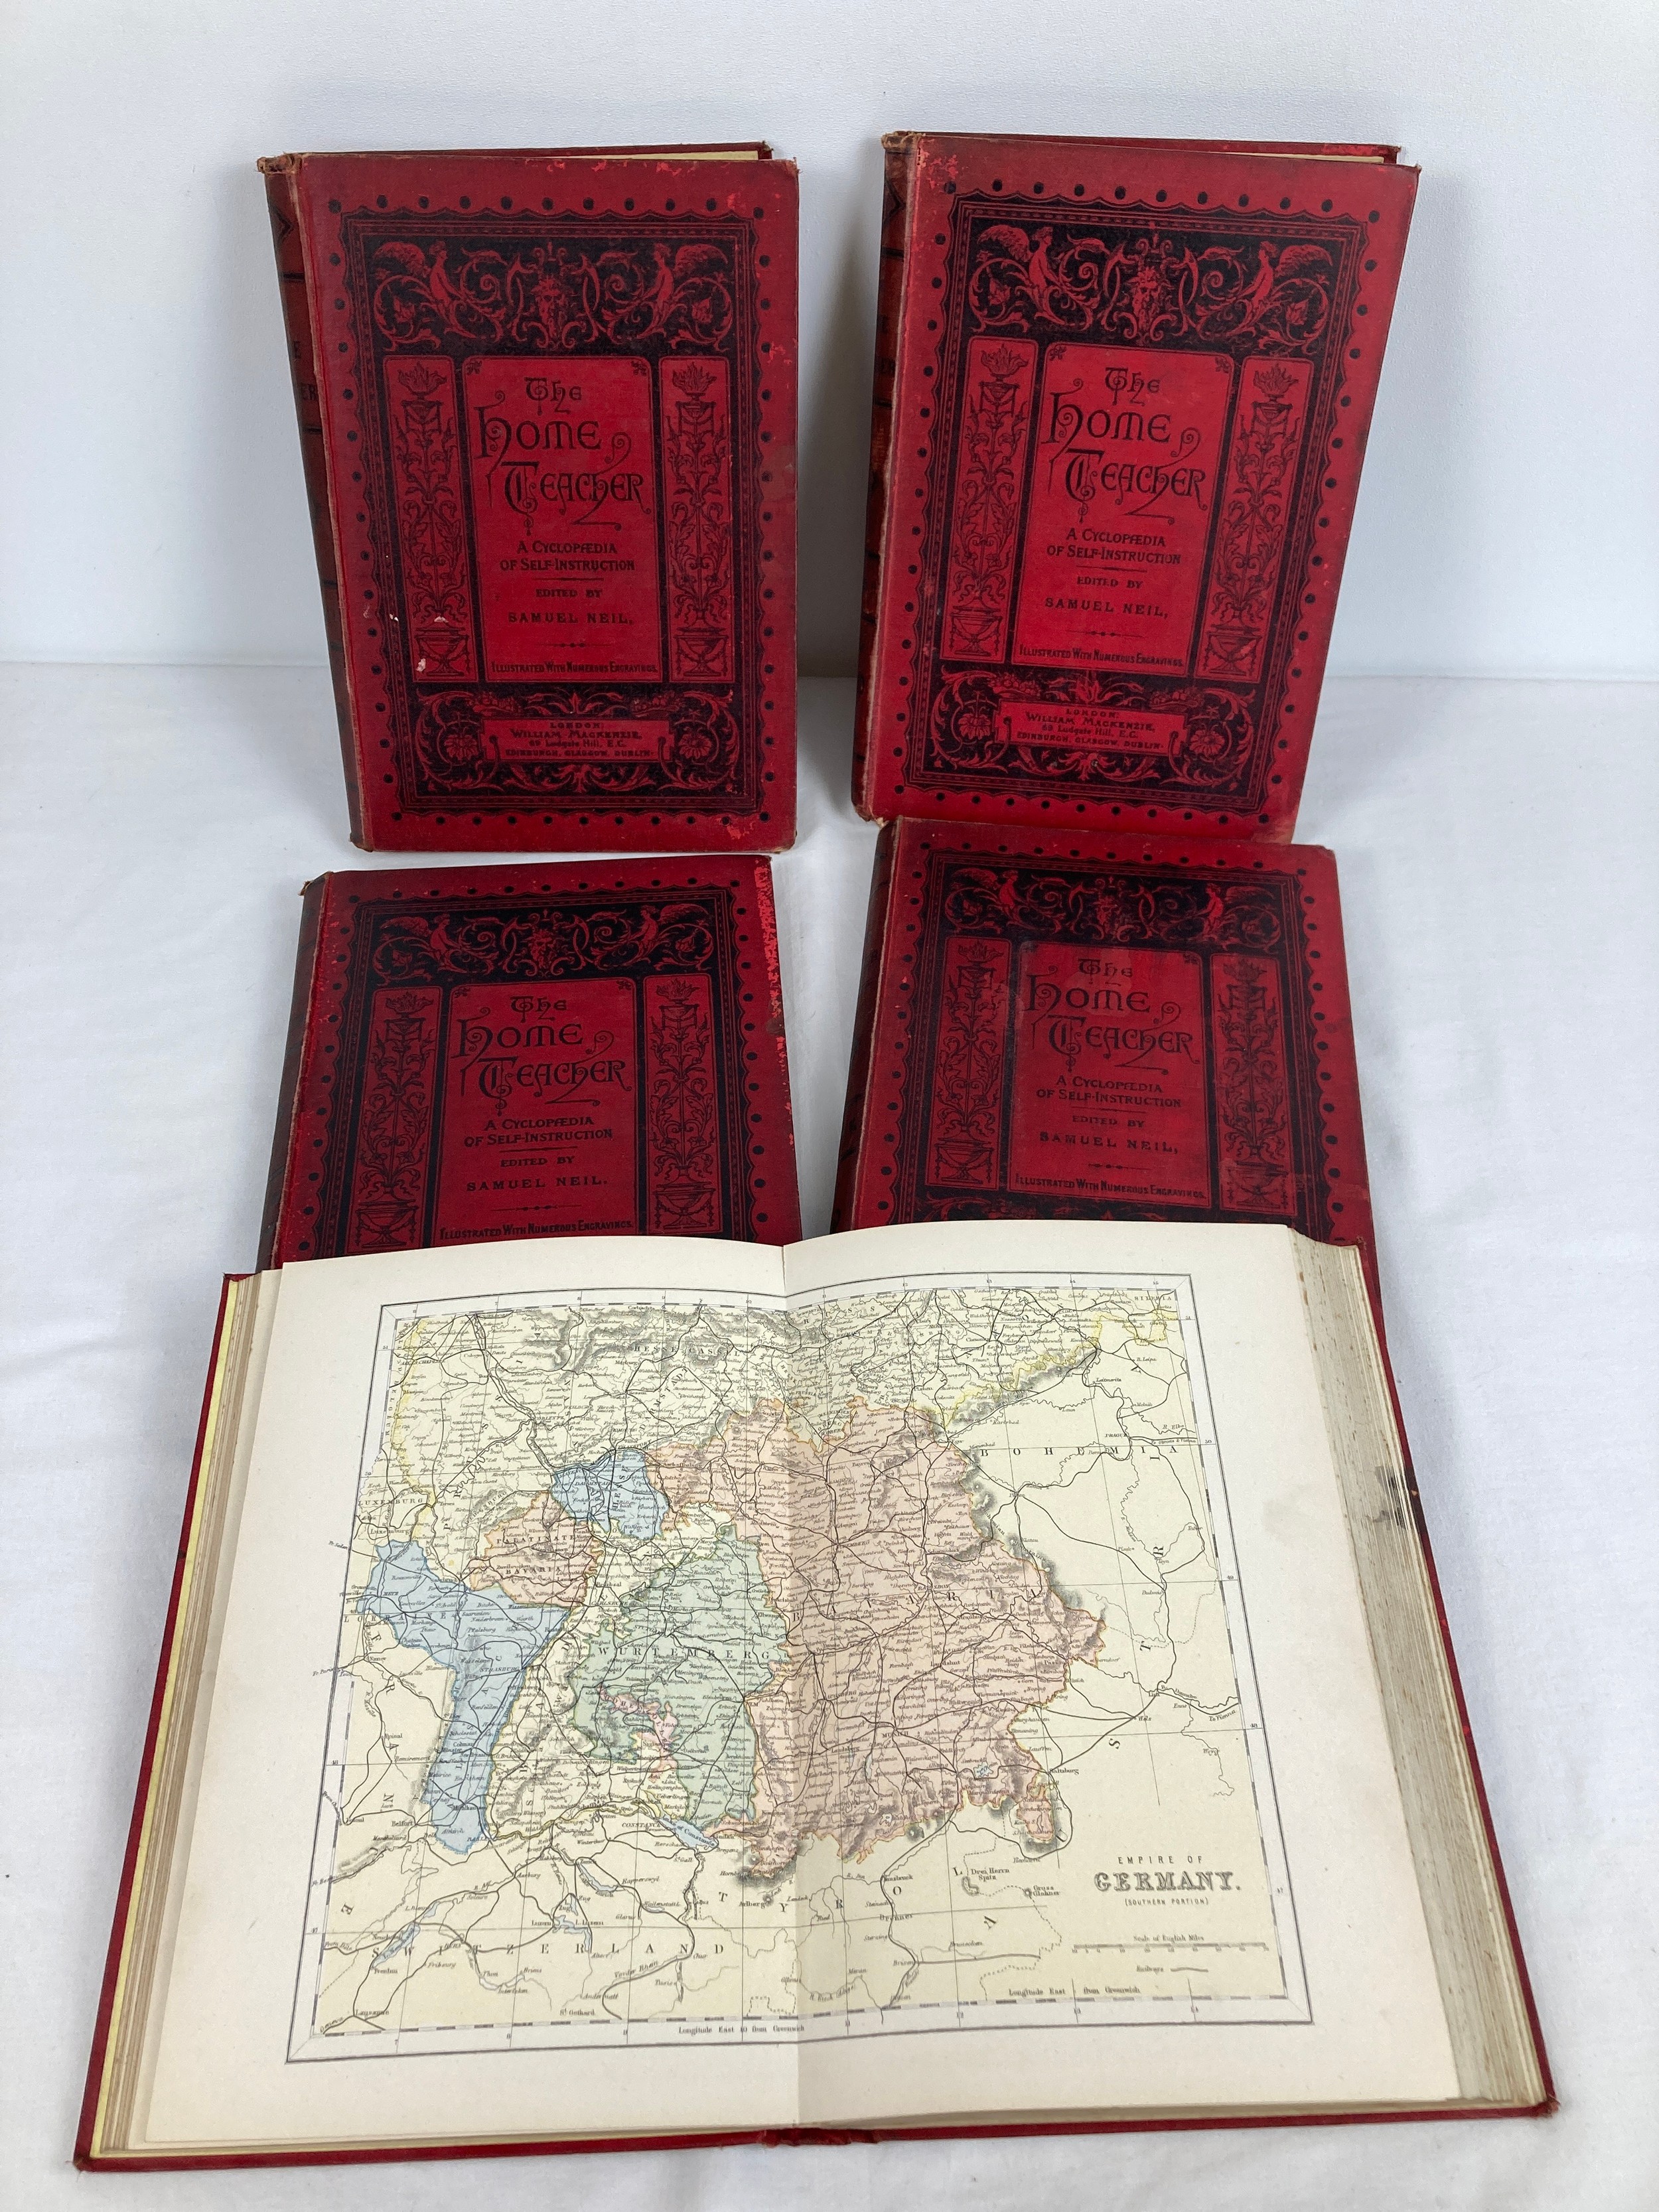 A set of 5 red cloth bound volumes of "The Home Teacher" edited by Samuel Neil. All books contain